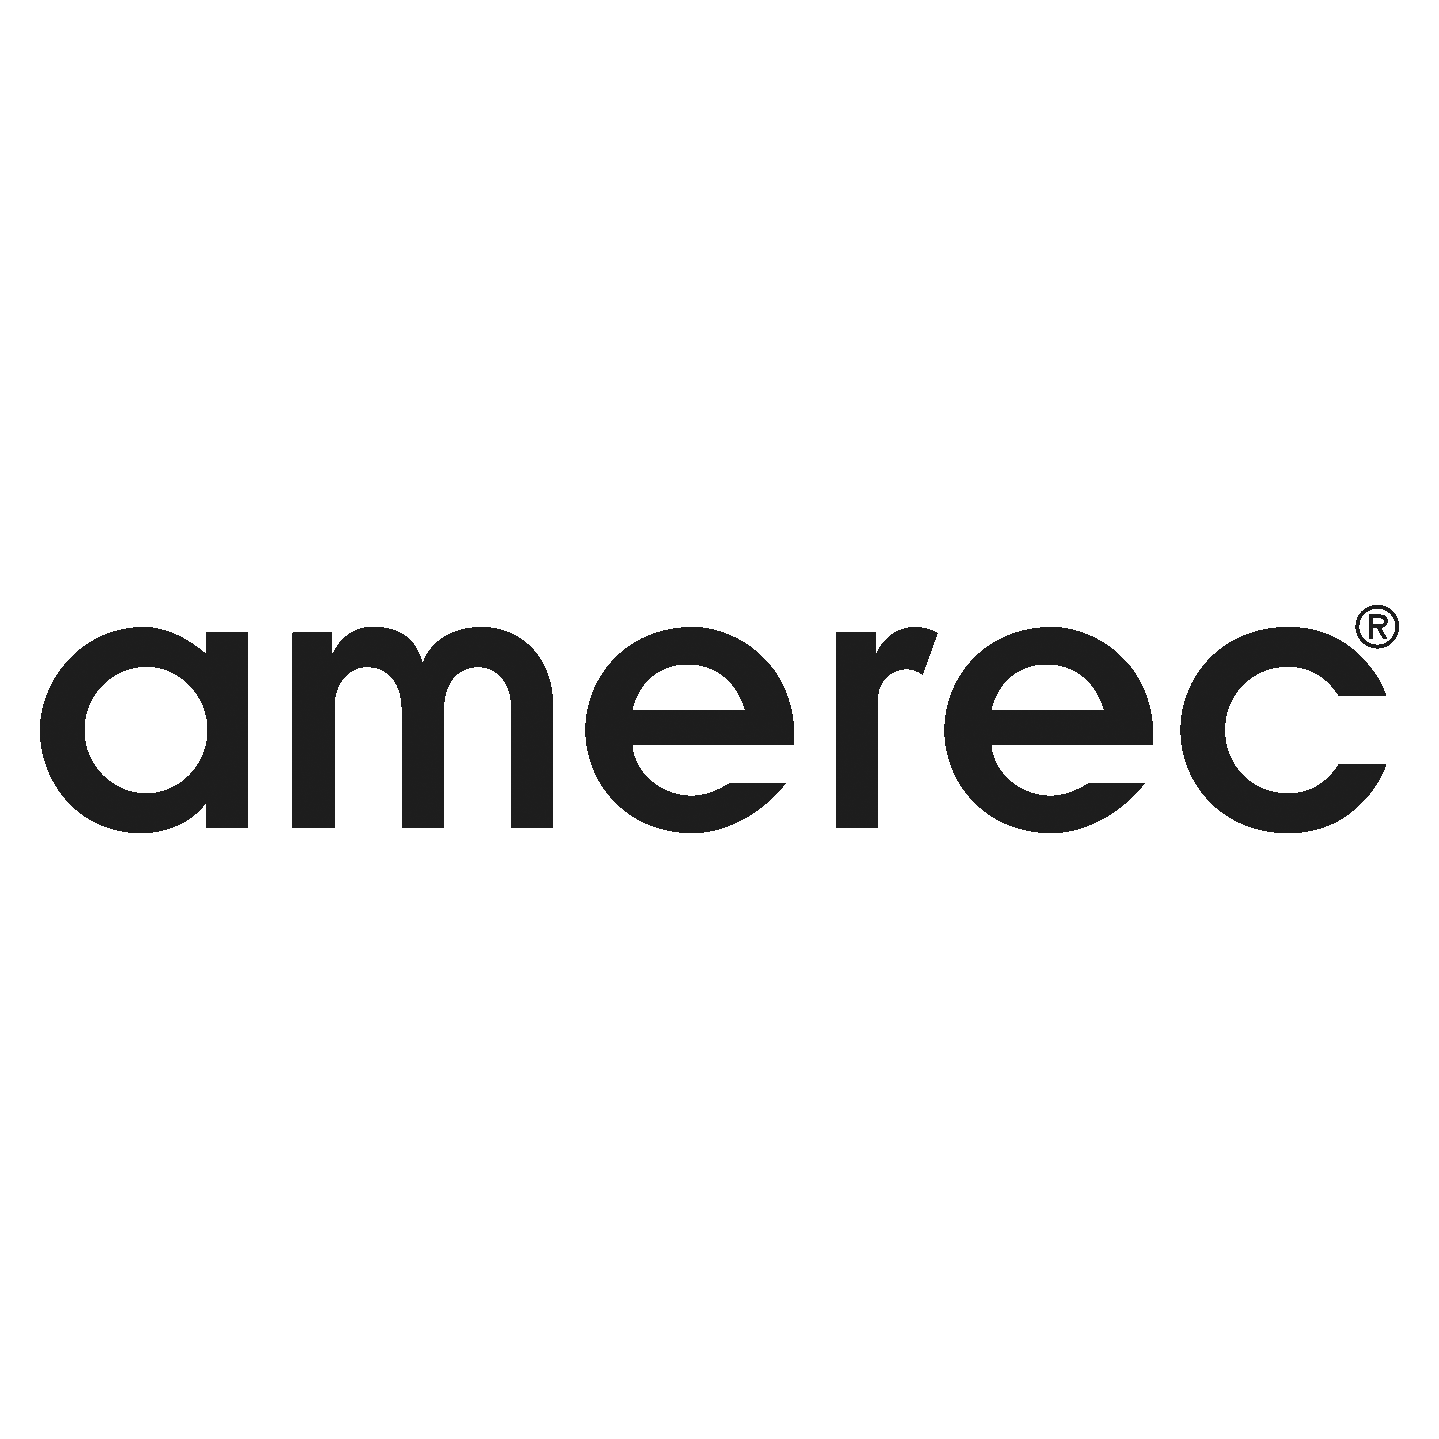 Questions About Amerec?